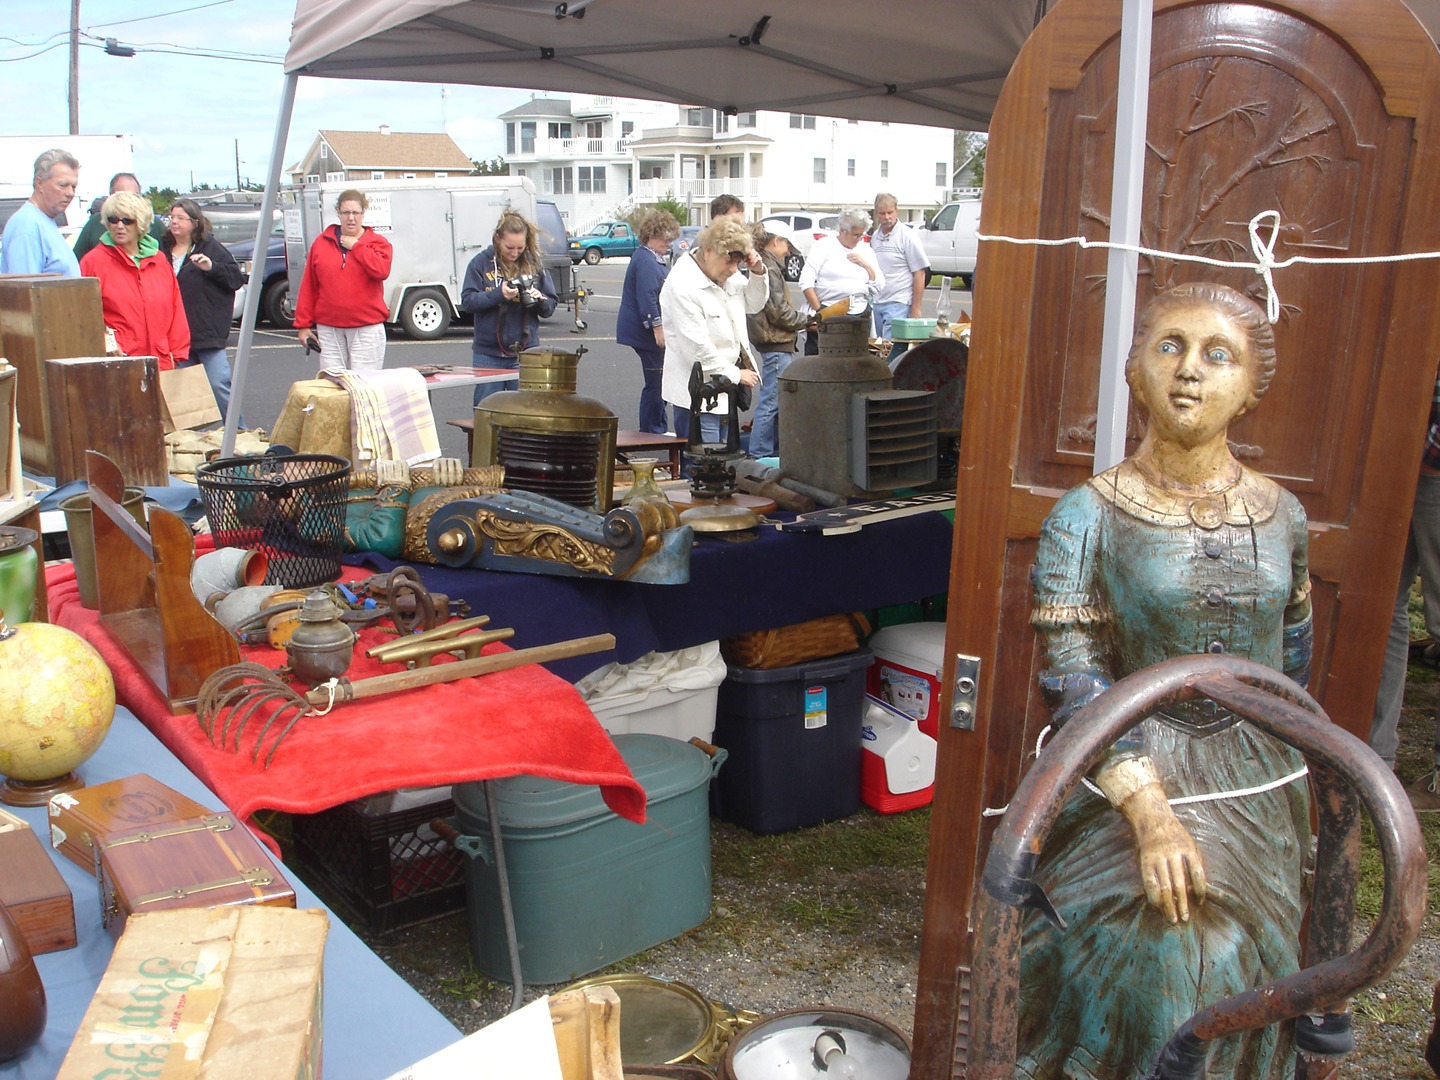 2019 Viking Village Antique and Collectible Show